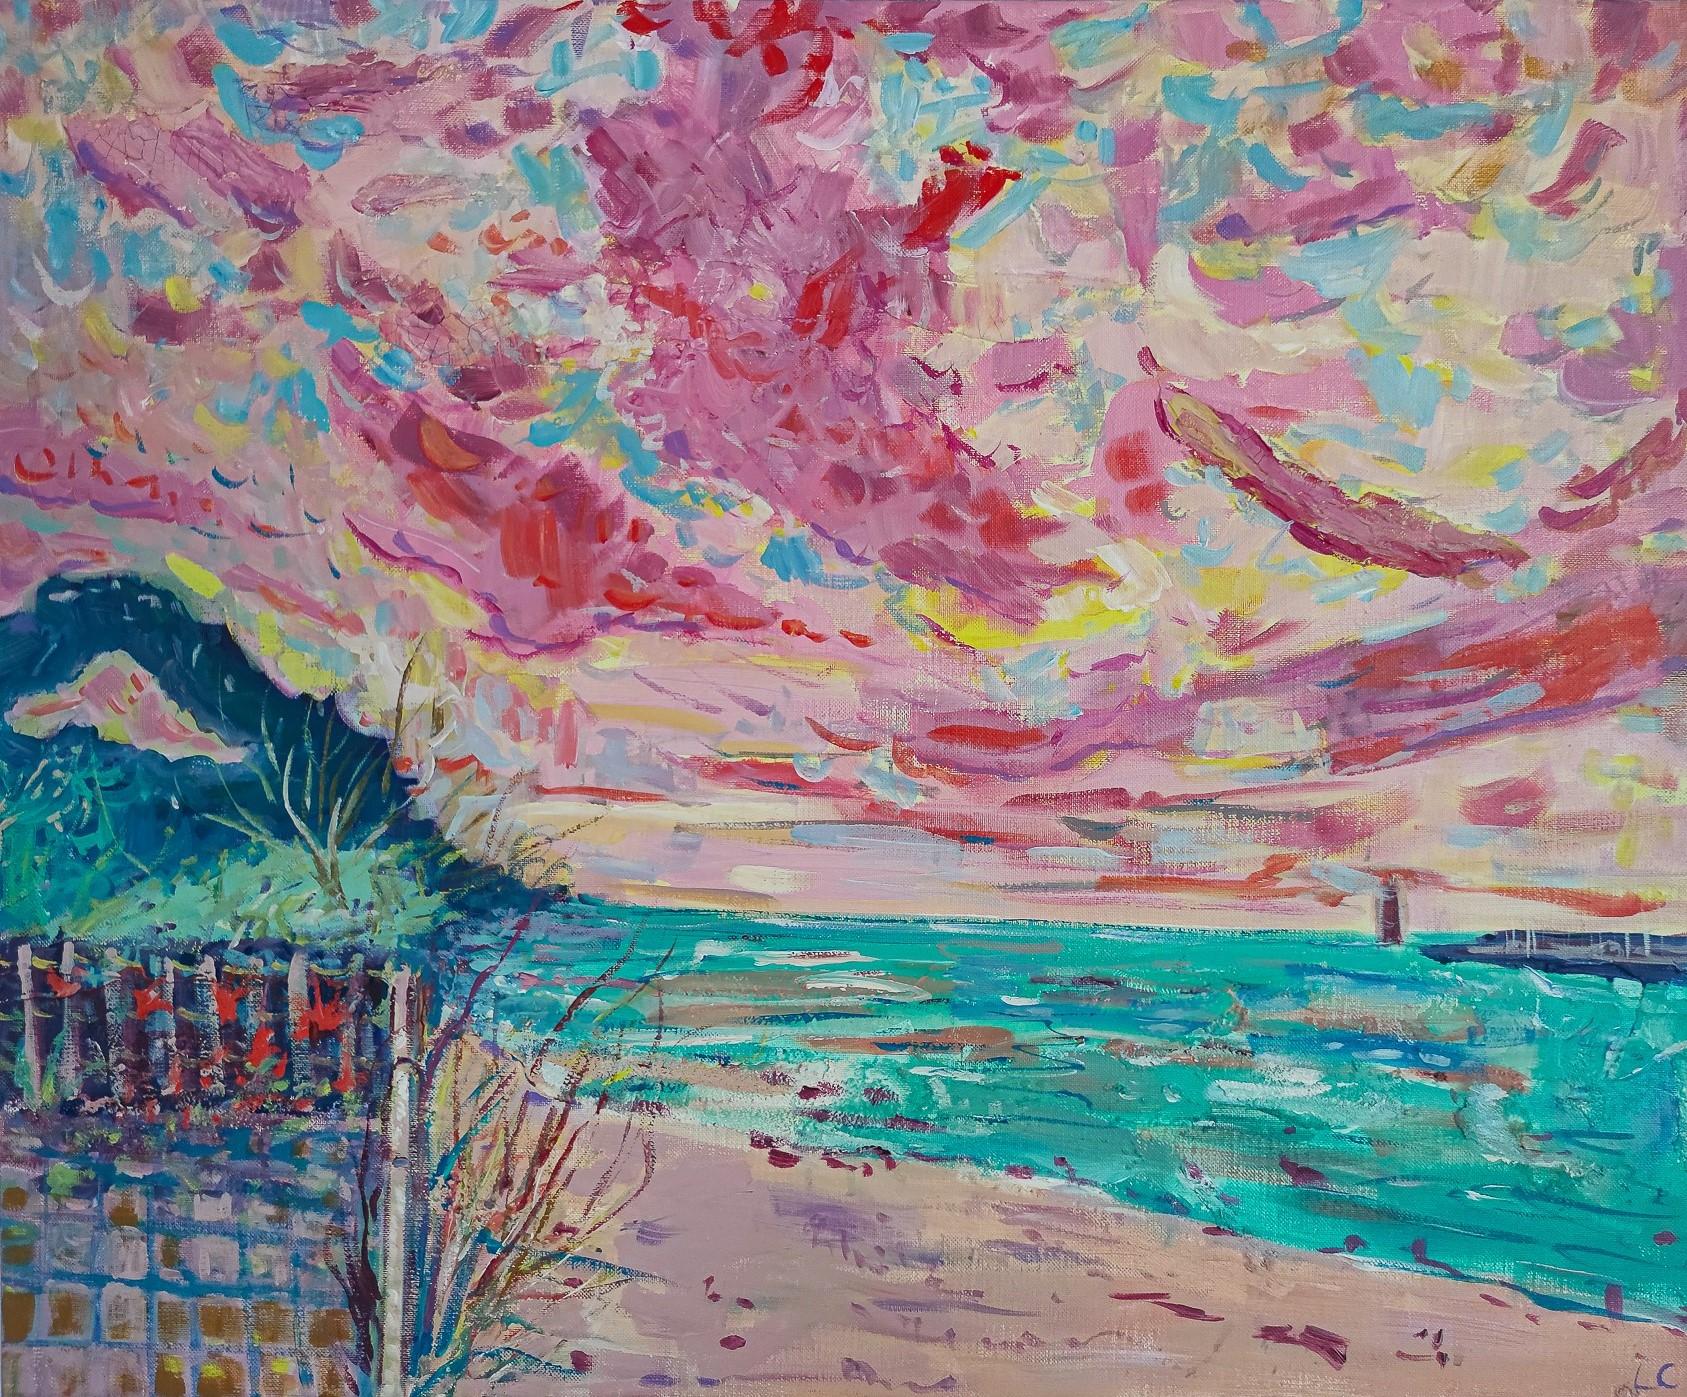 "Introducing "Marine Bubble Gum 2": an enchanting landscape where the pink sky is dotted with majestic shades of blue and yellow, creating a magnificent canvas above the endless ocean. In the distance, a lighthouse stands proudly, adding a touch of